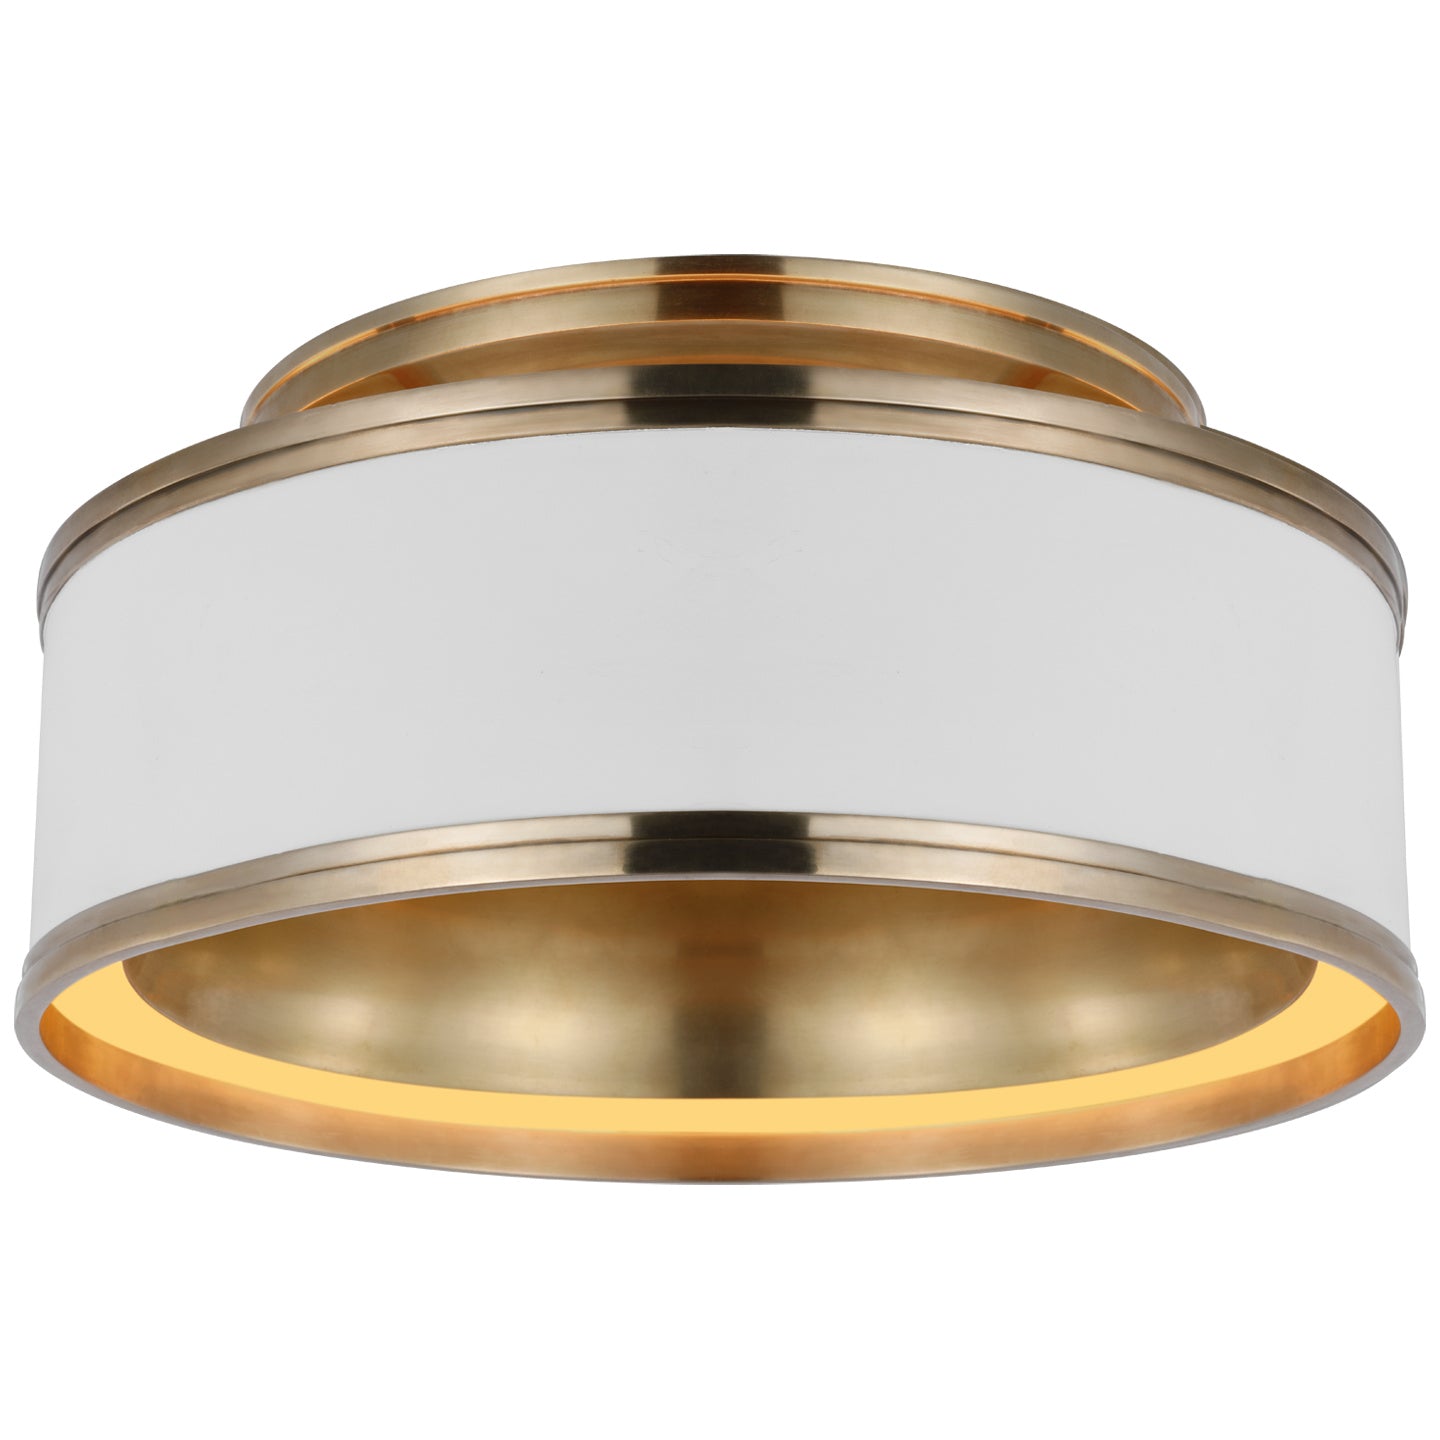 Visual Comfort Signature - CHC 4611WHT/AB - LED Flush Mount - Connery - Matte White and Antique-Burnished Brass